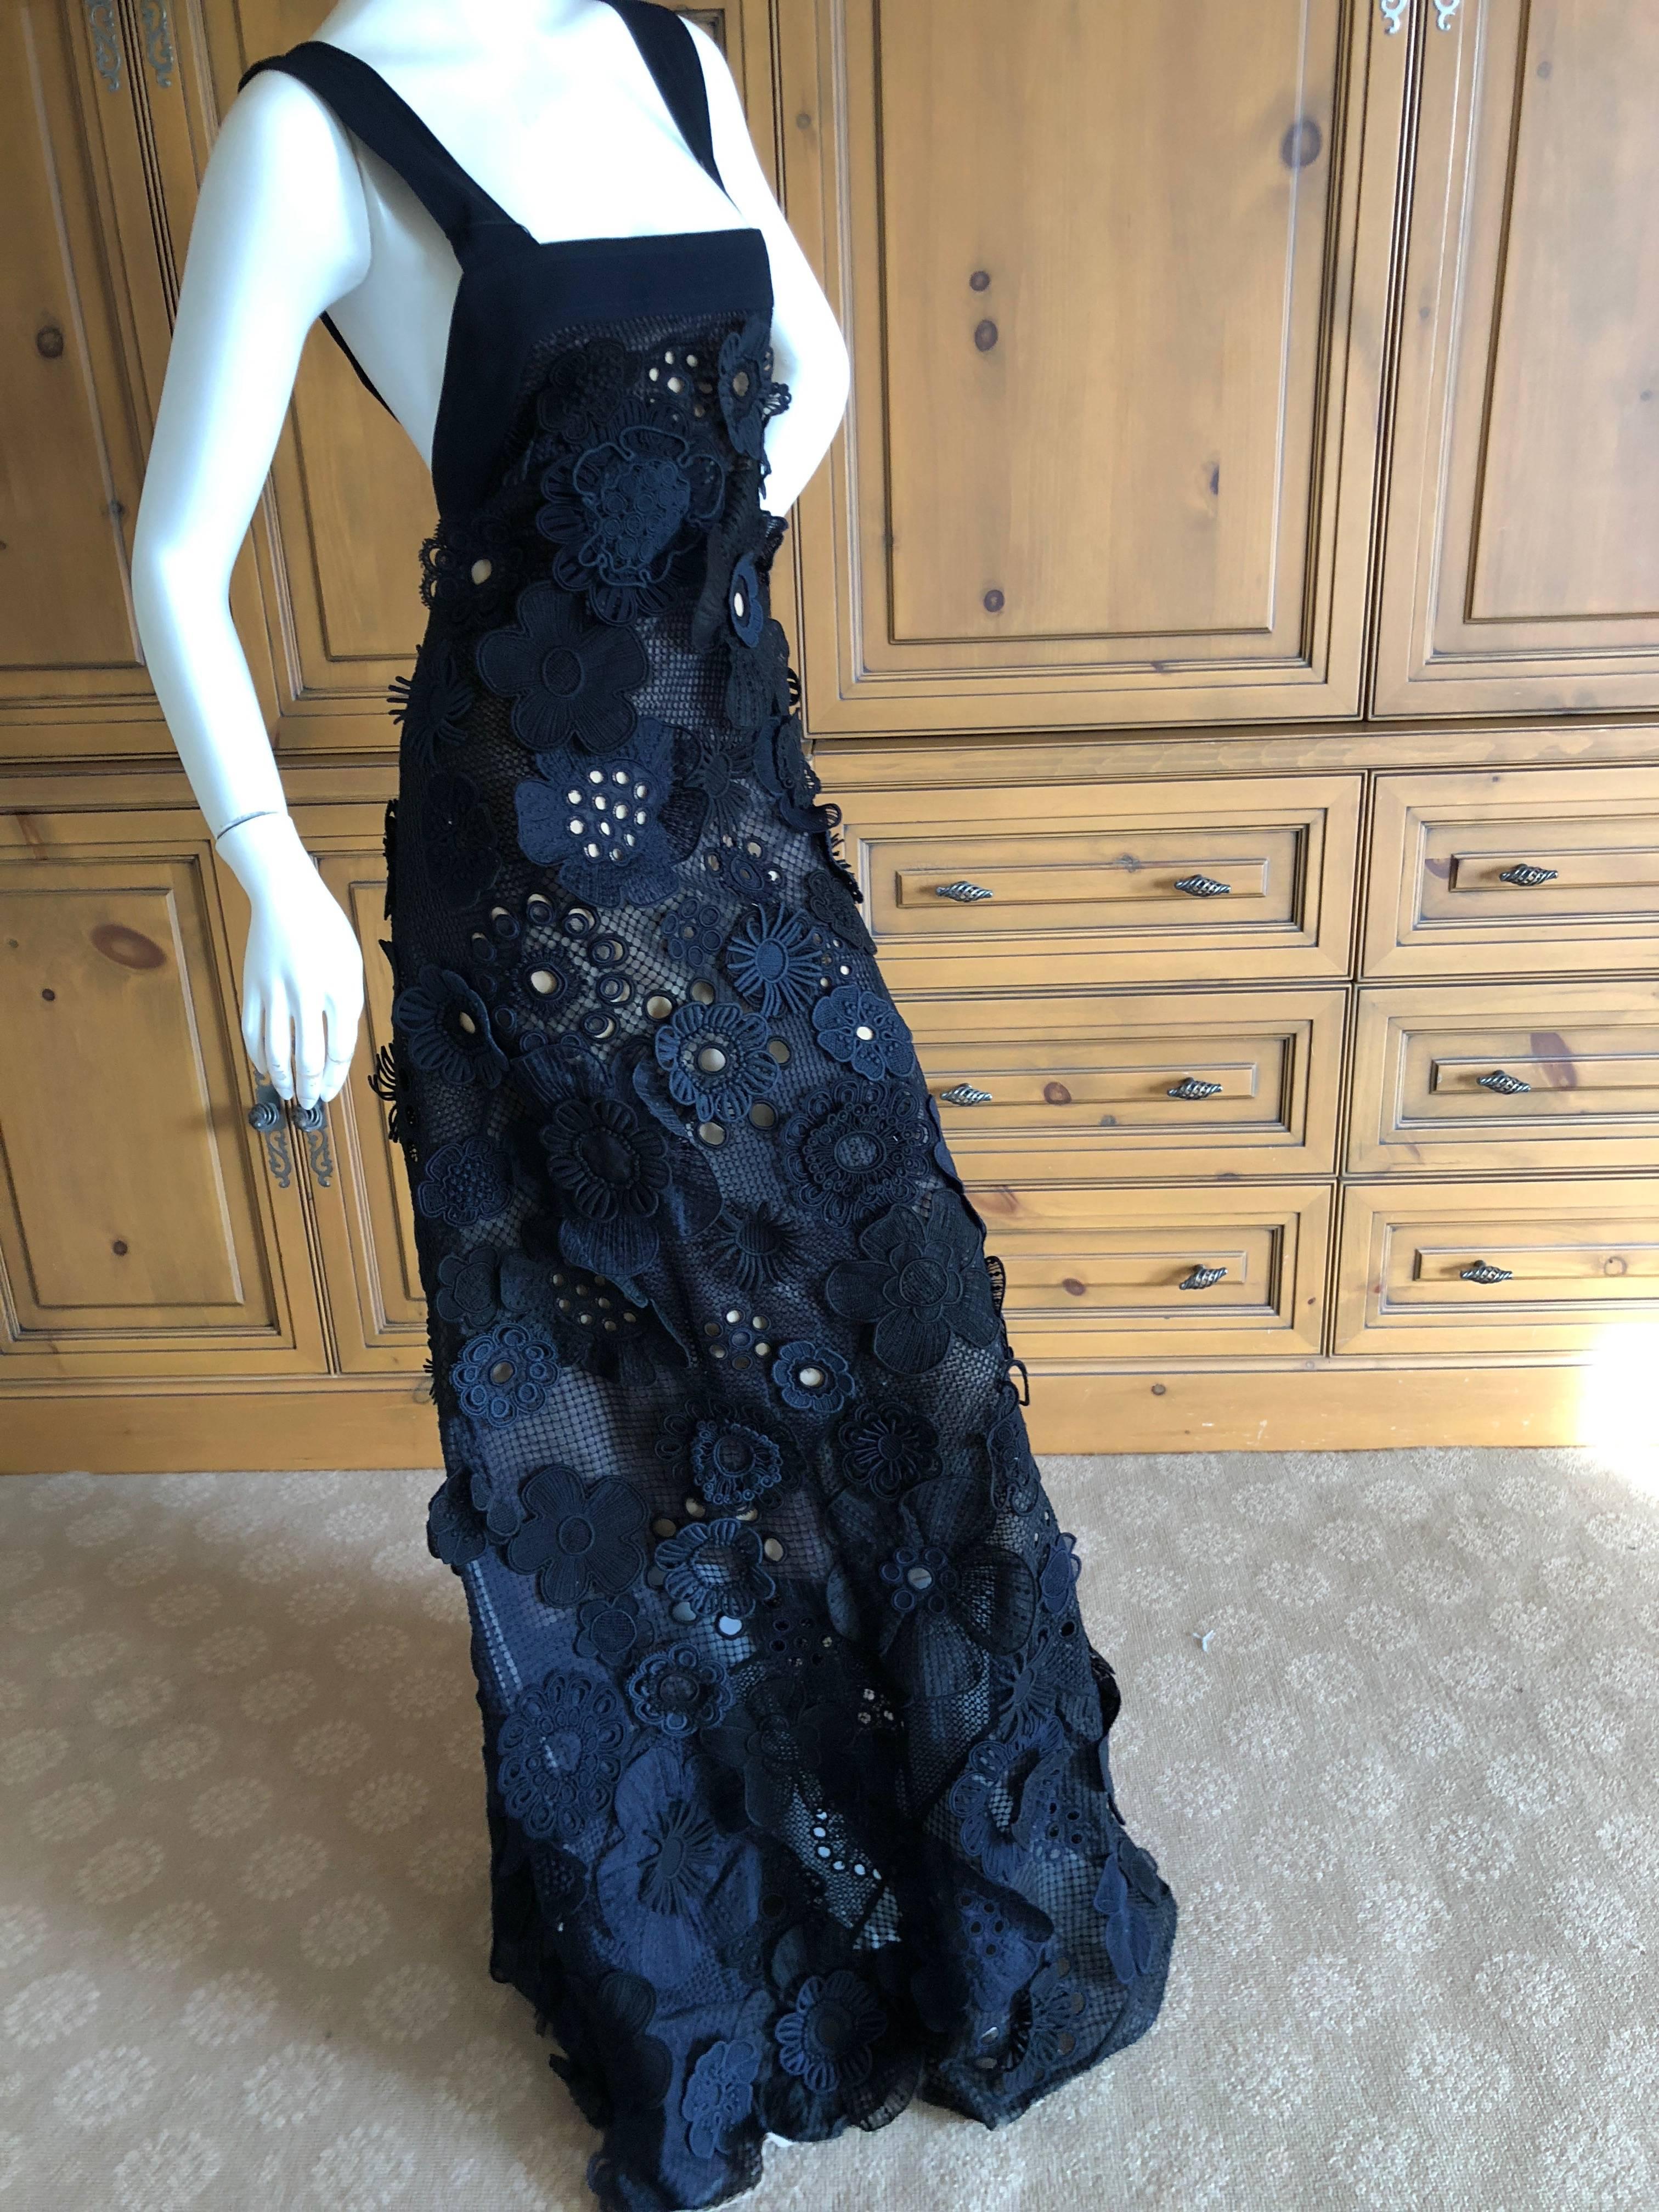 Chloe by Clare Waight Keller Spring 2017 Sheer Lace Florette Dress New 1